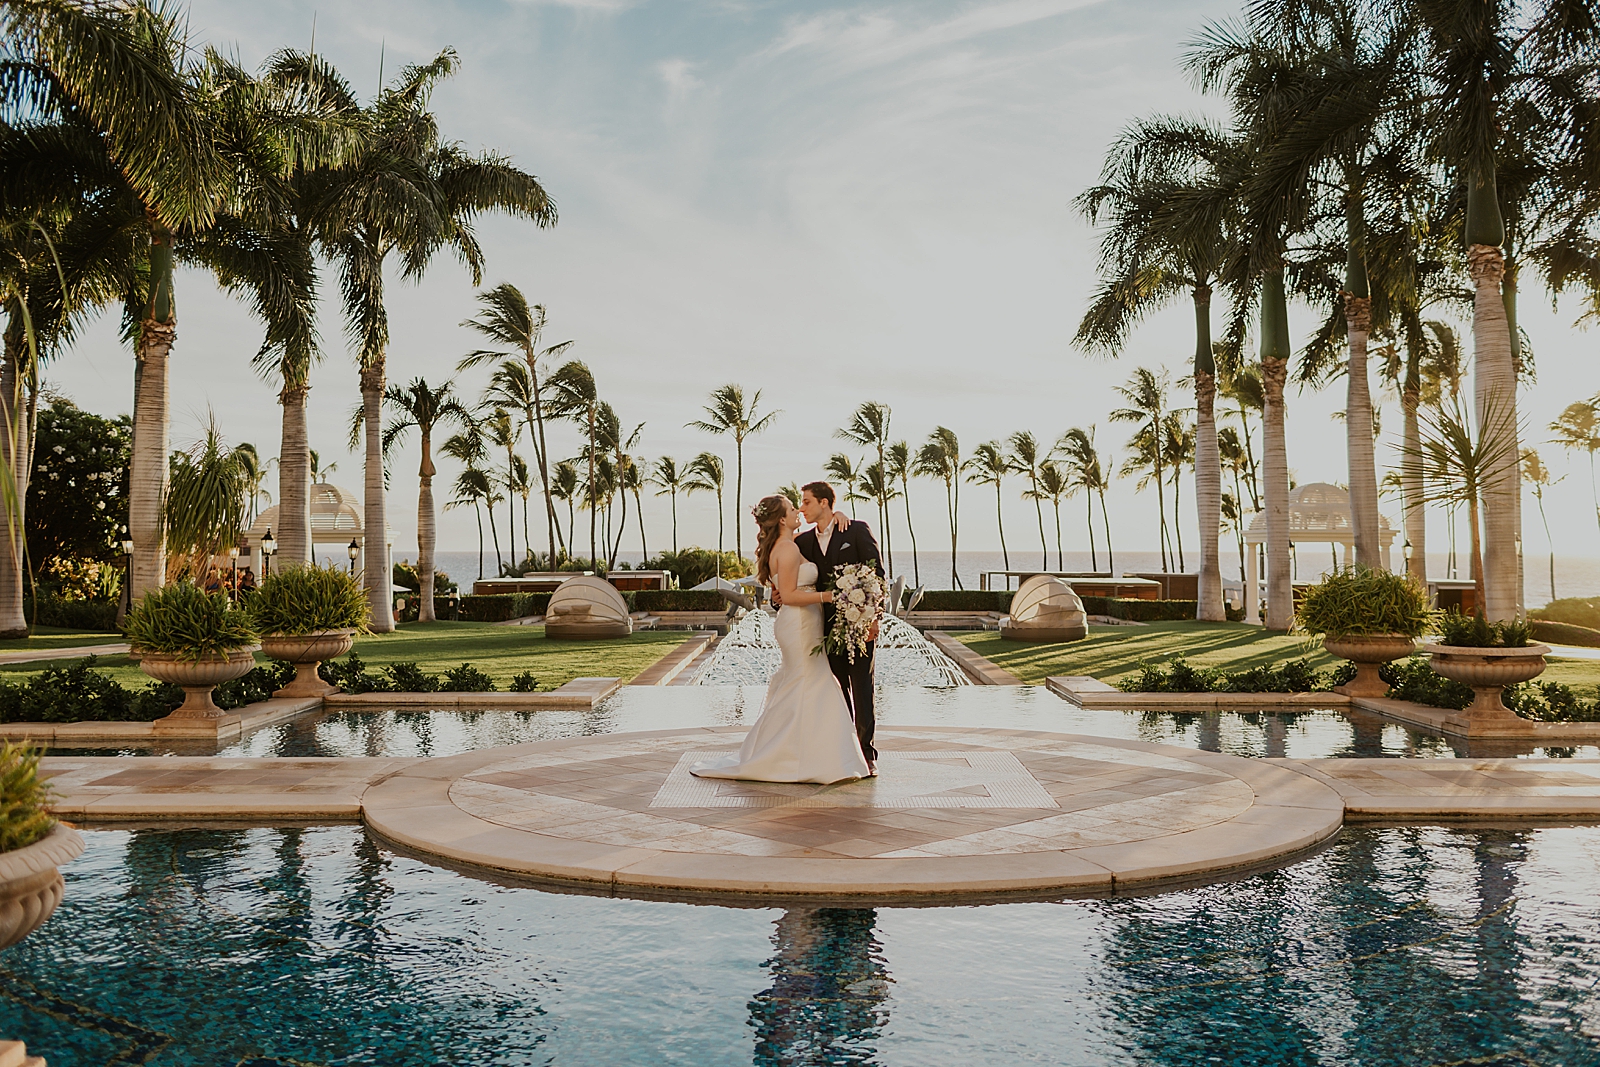 Wide shot of Bride and Groom standing in center of water fountain area